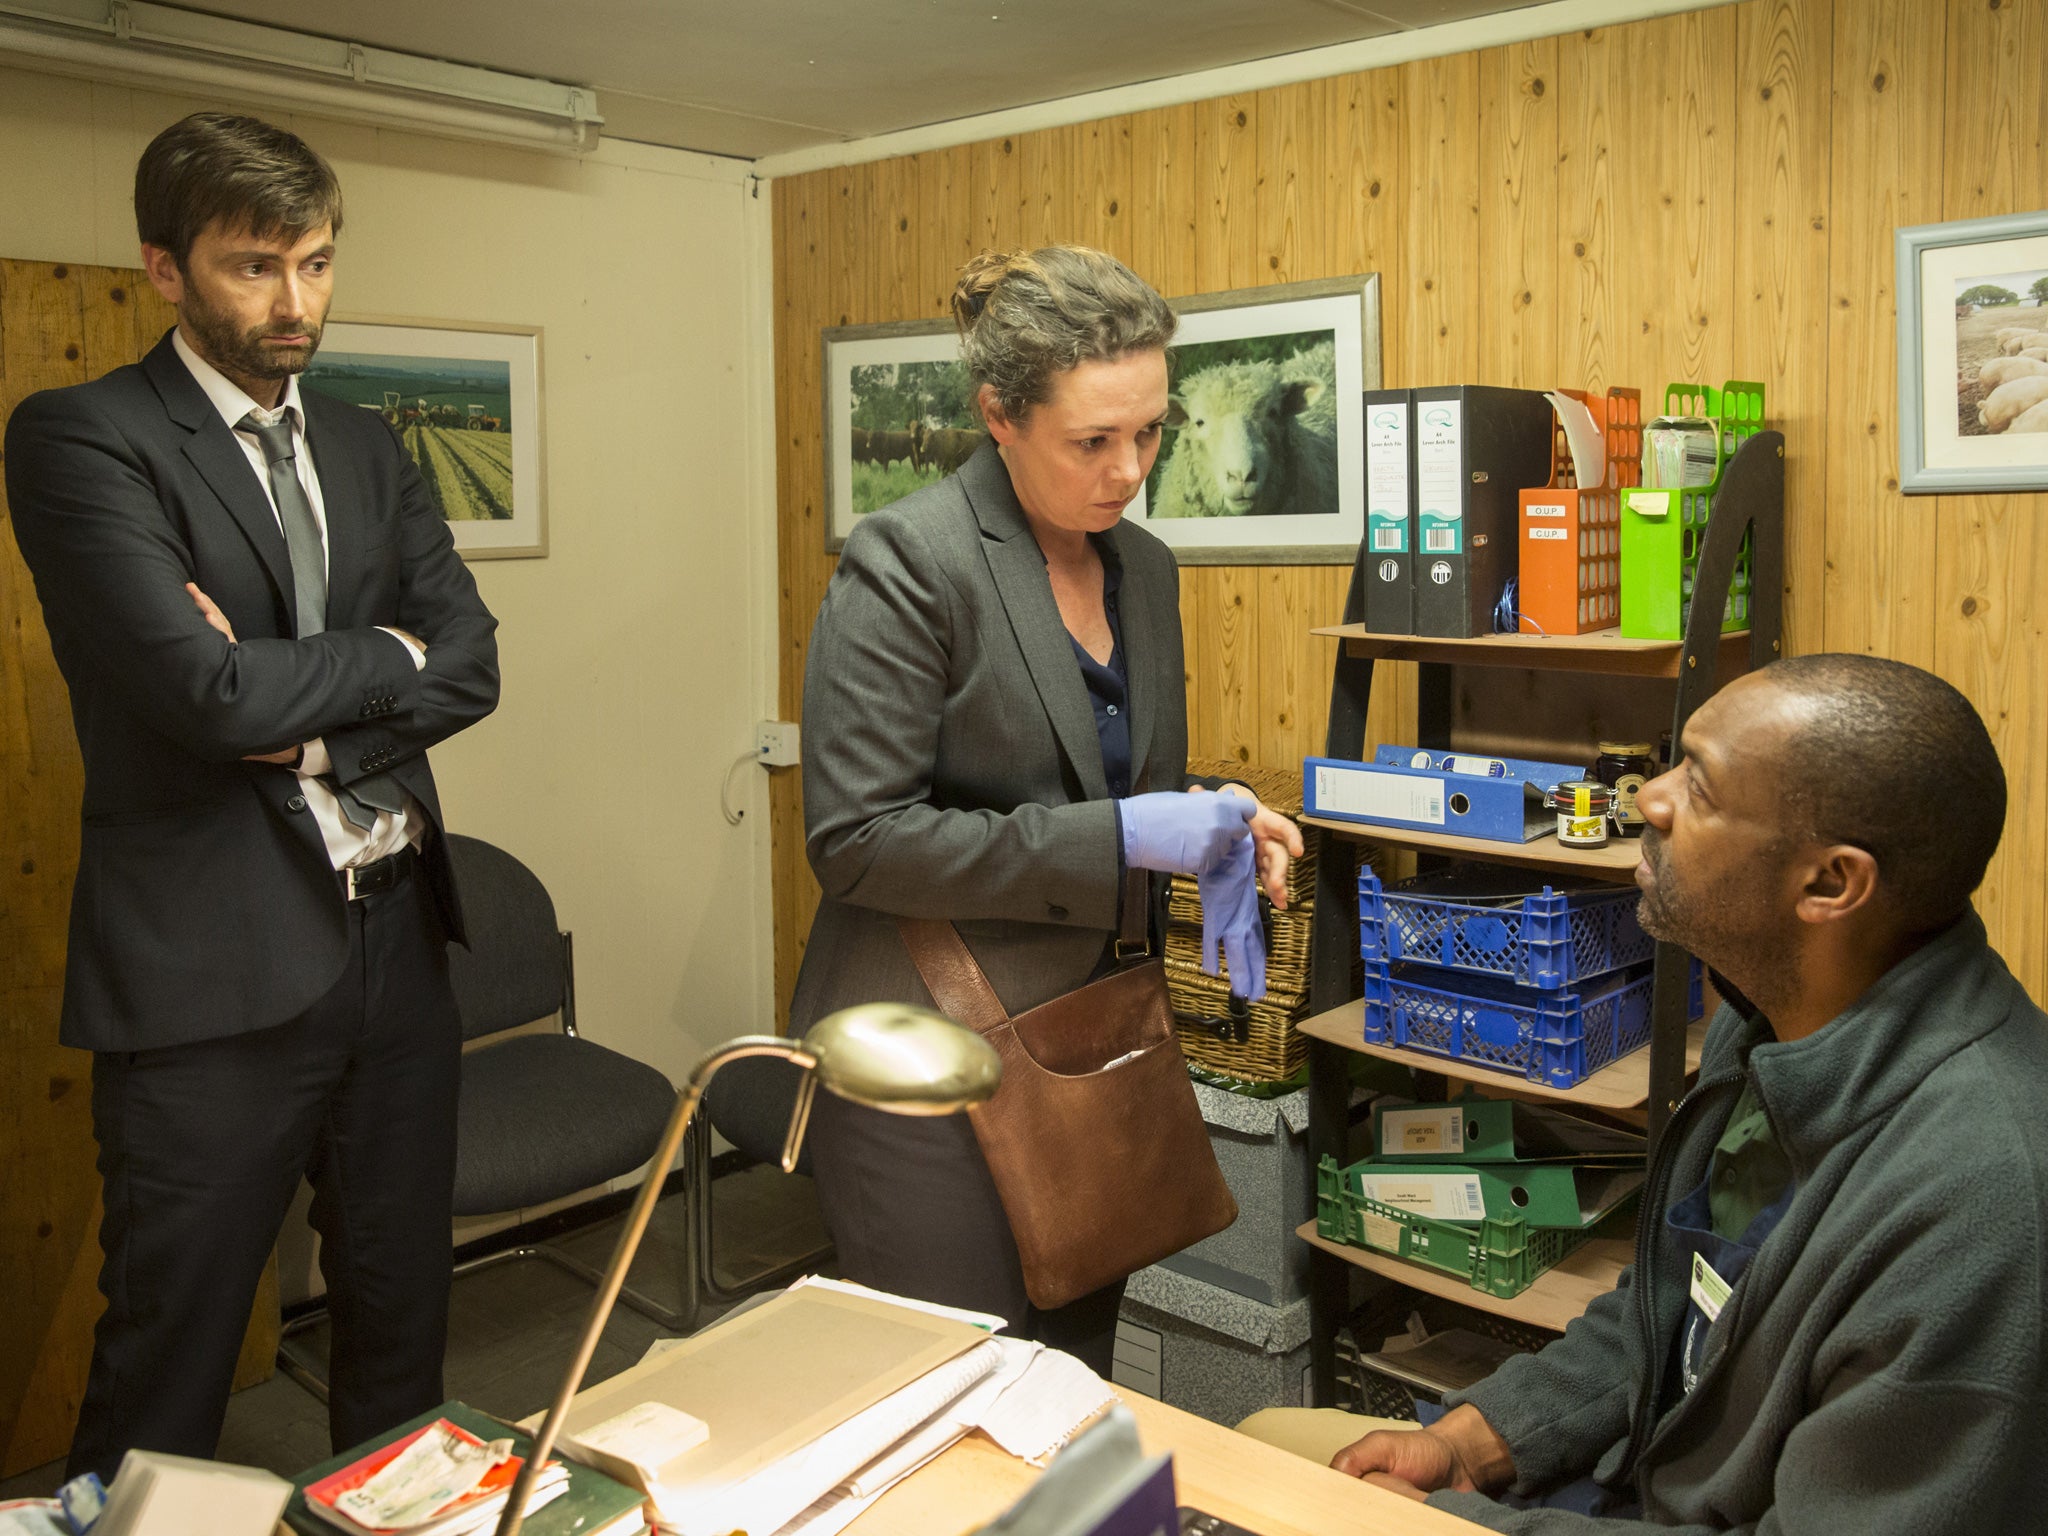 DI Hardy (David Tennant) and DS Miller (Olivia Colman) question Ed Burnett (Lenny Henry) as they got no closer to finding Trish Winterman's attacker